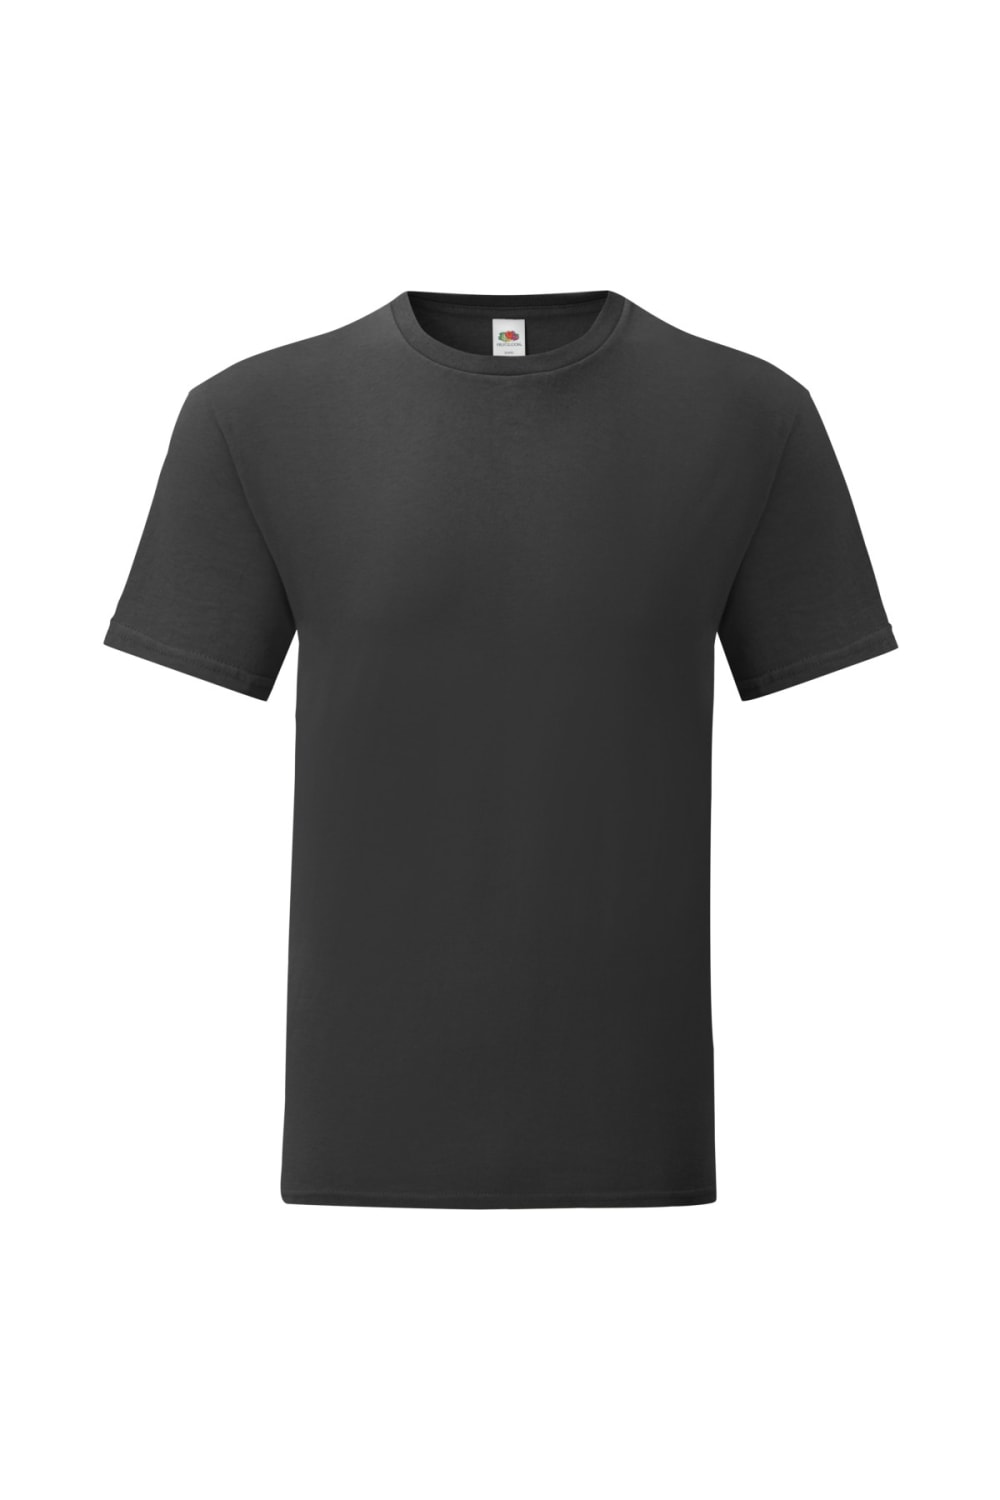 Fruit Of The Loom Mens Iconic T-Shirt (Black)